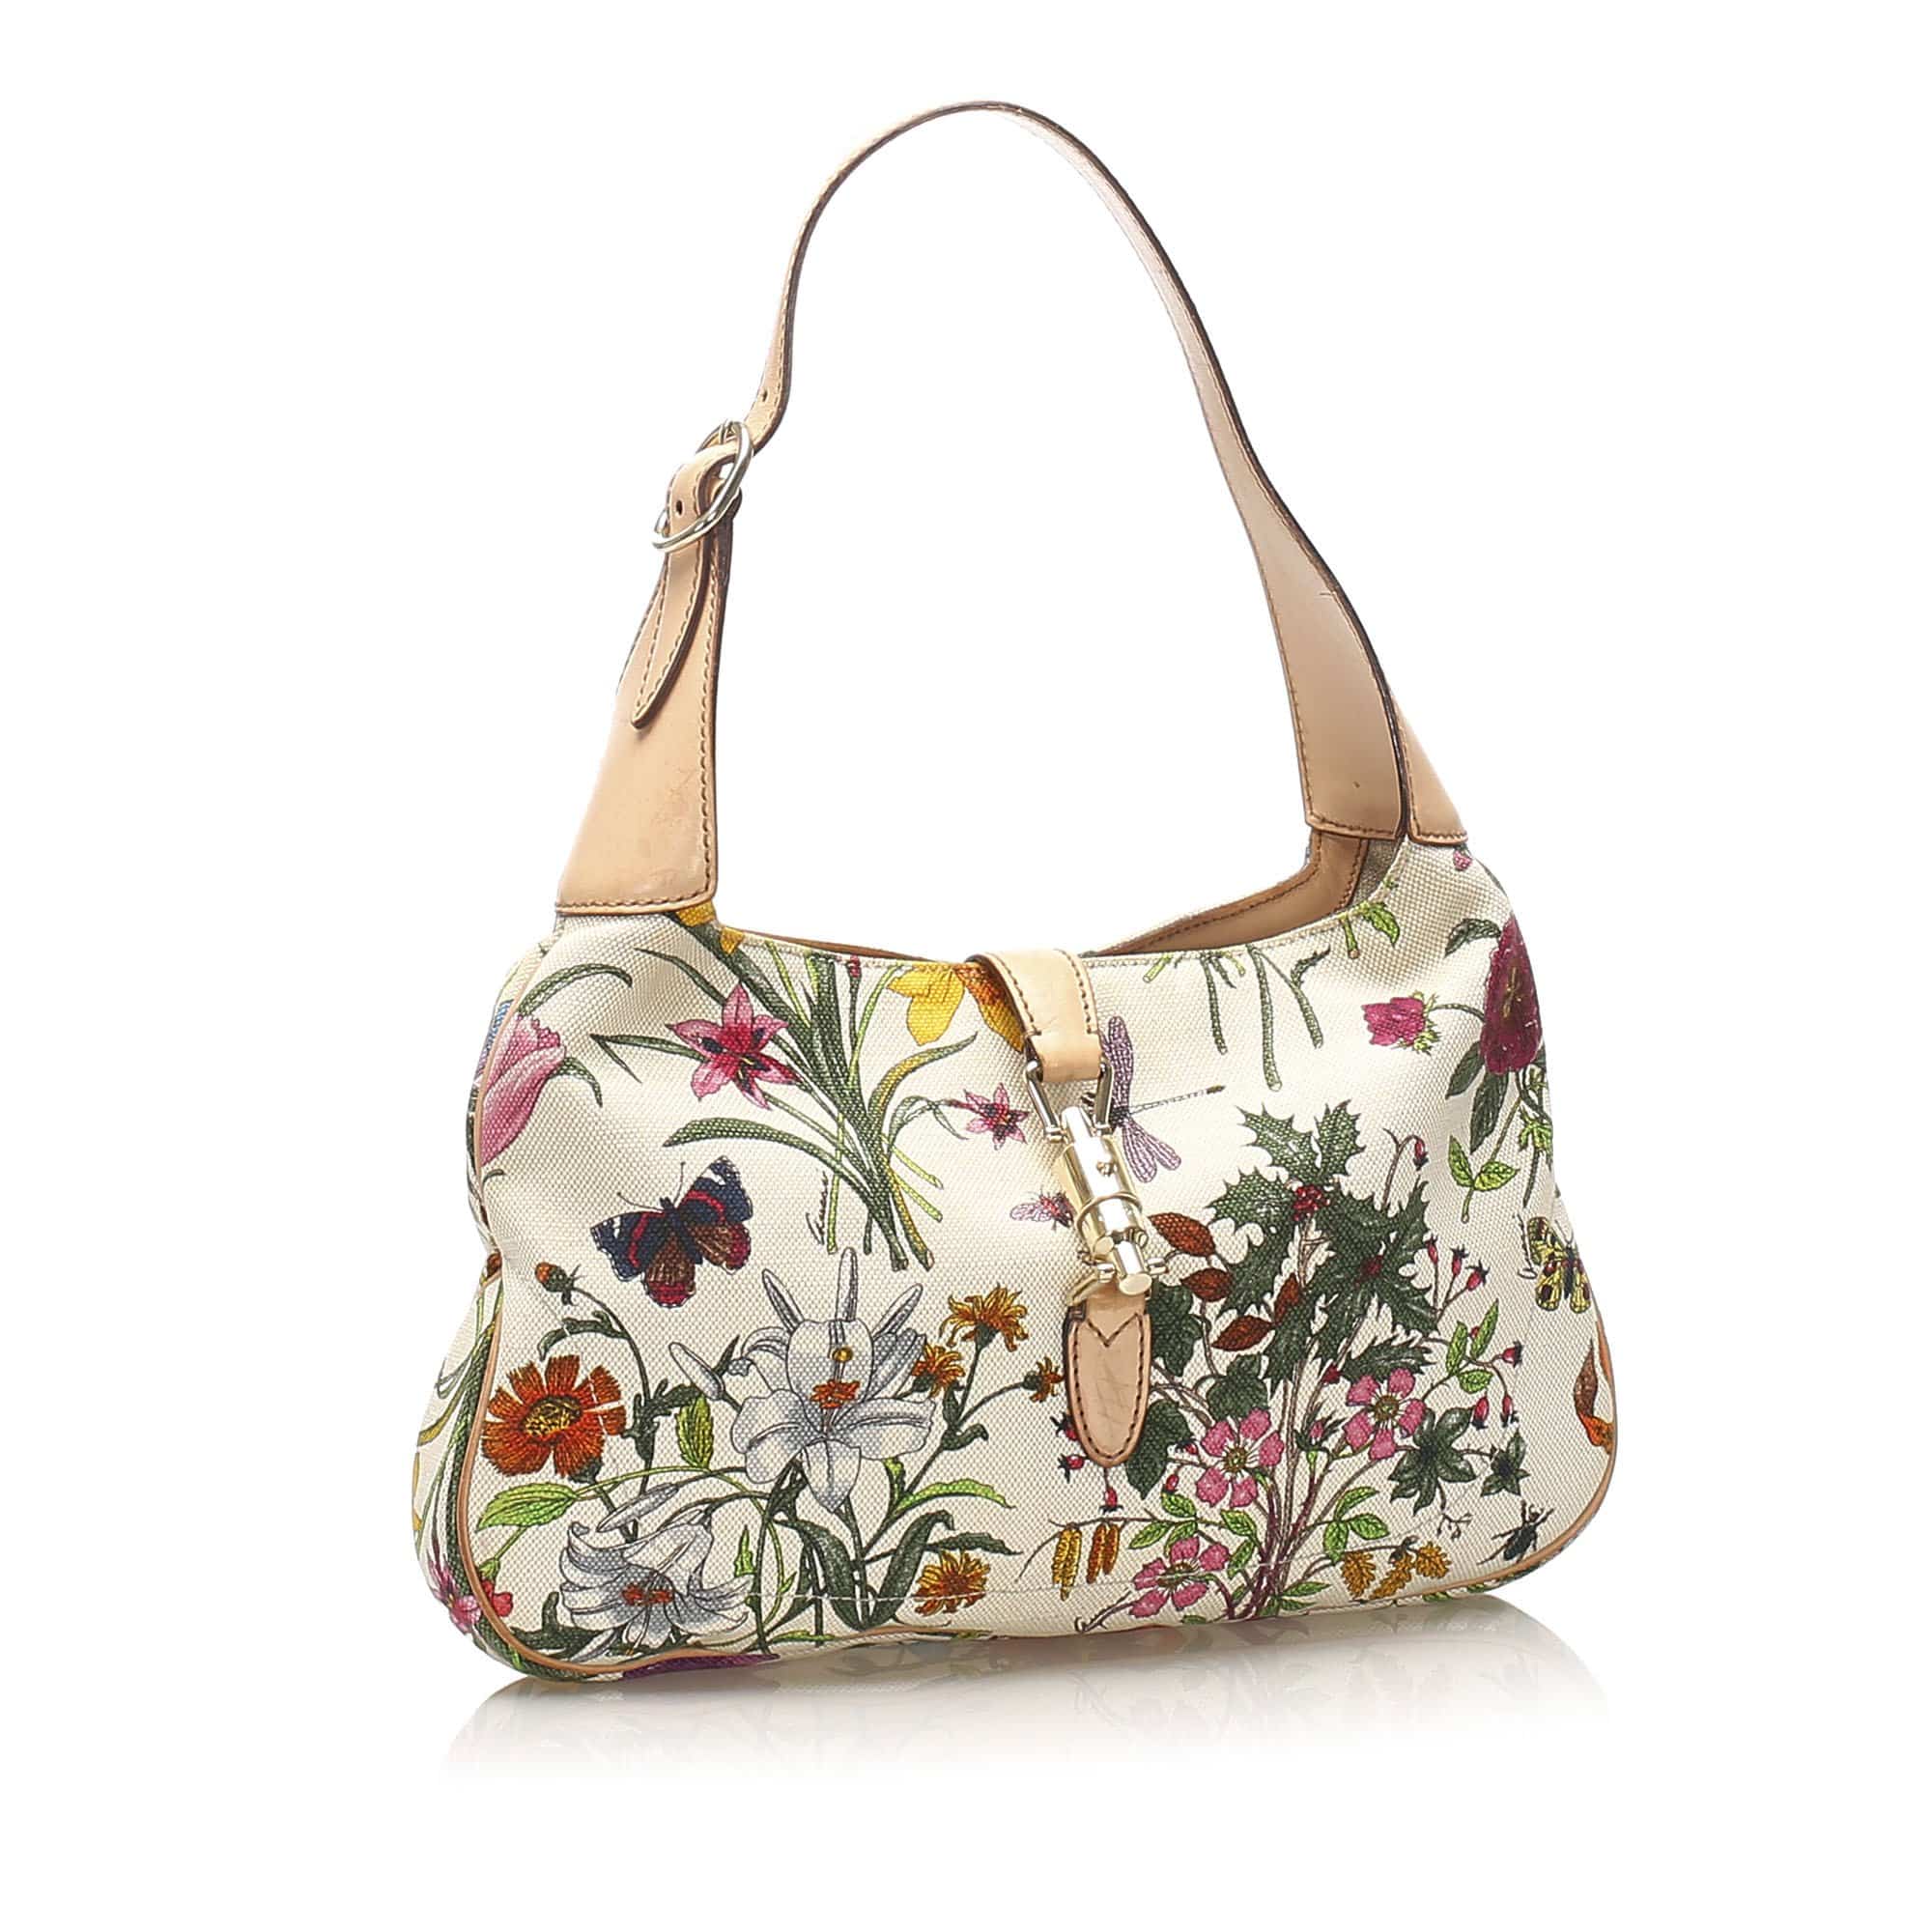 Gucci Guccissima Floral Jackie O Bag